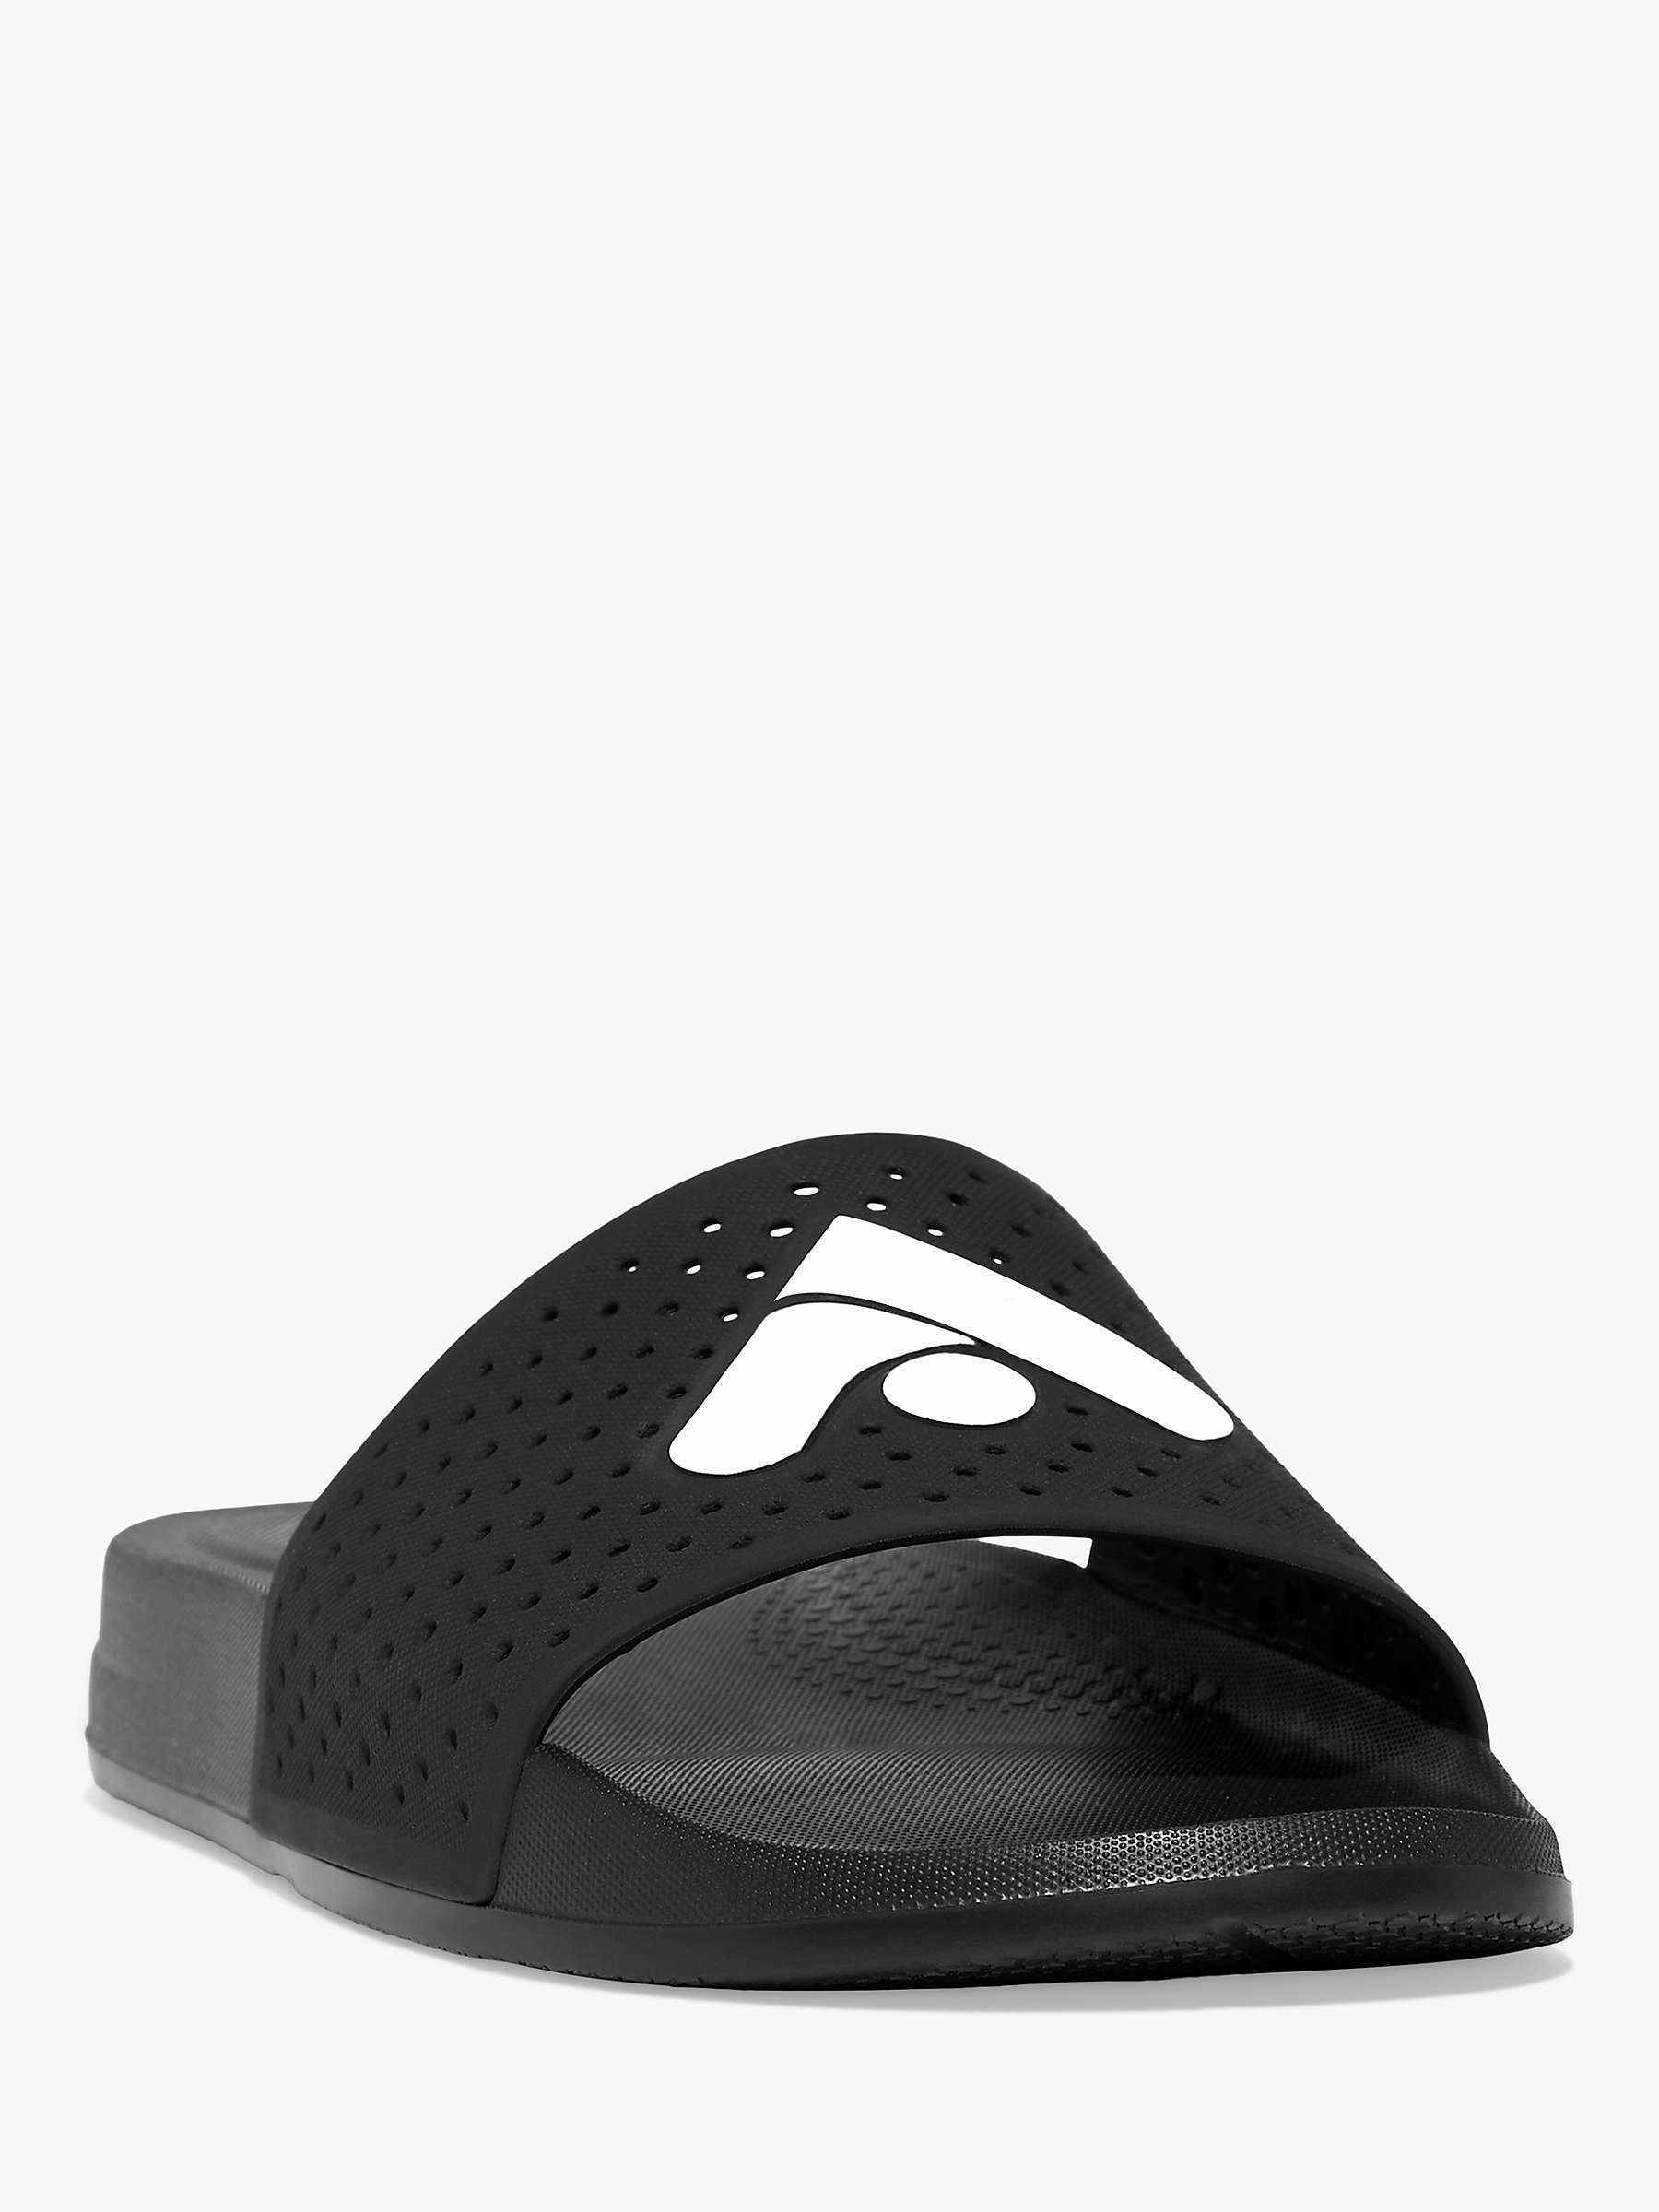 Buy FitFlop Iquishion Pool Sliders, Black Online at johnlewis.com